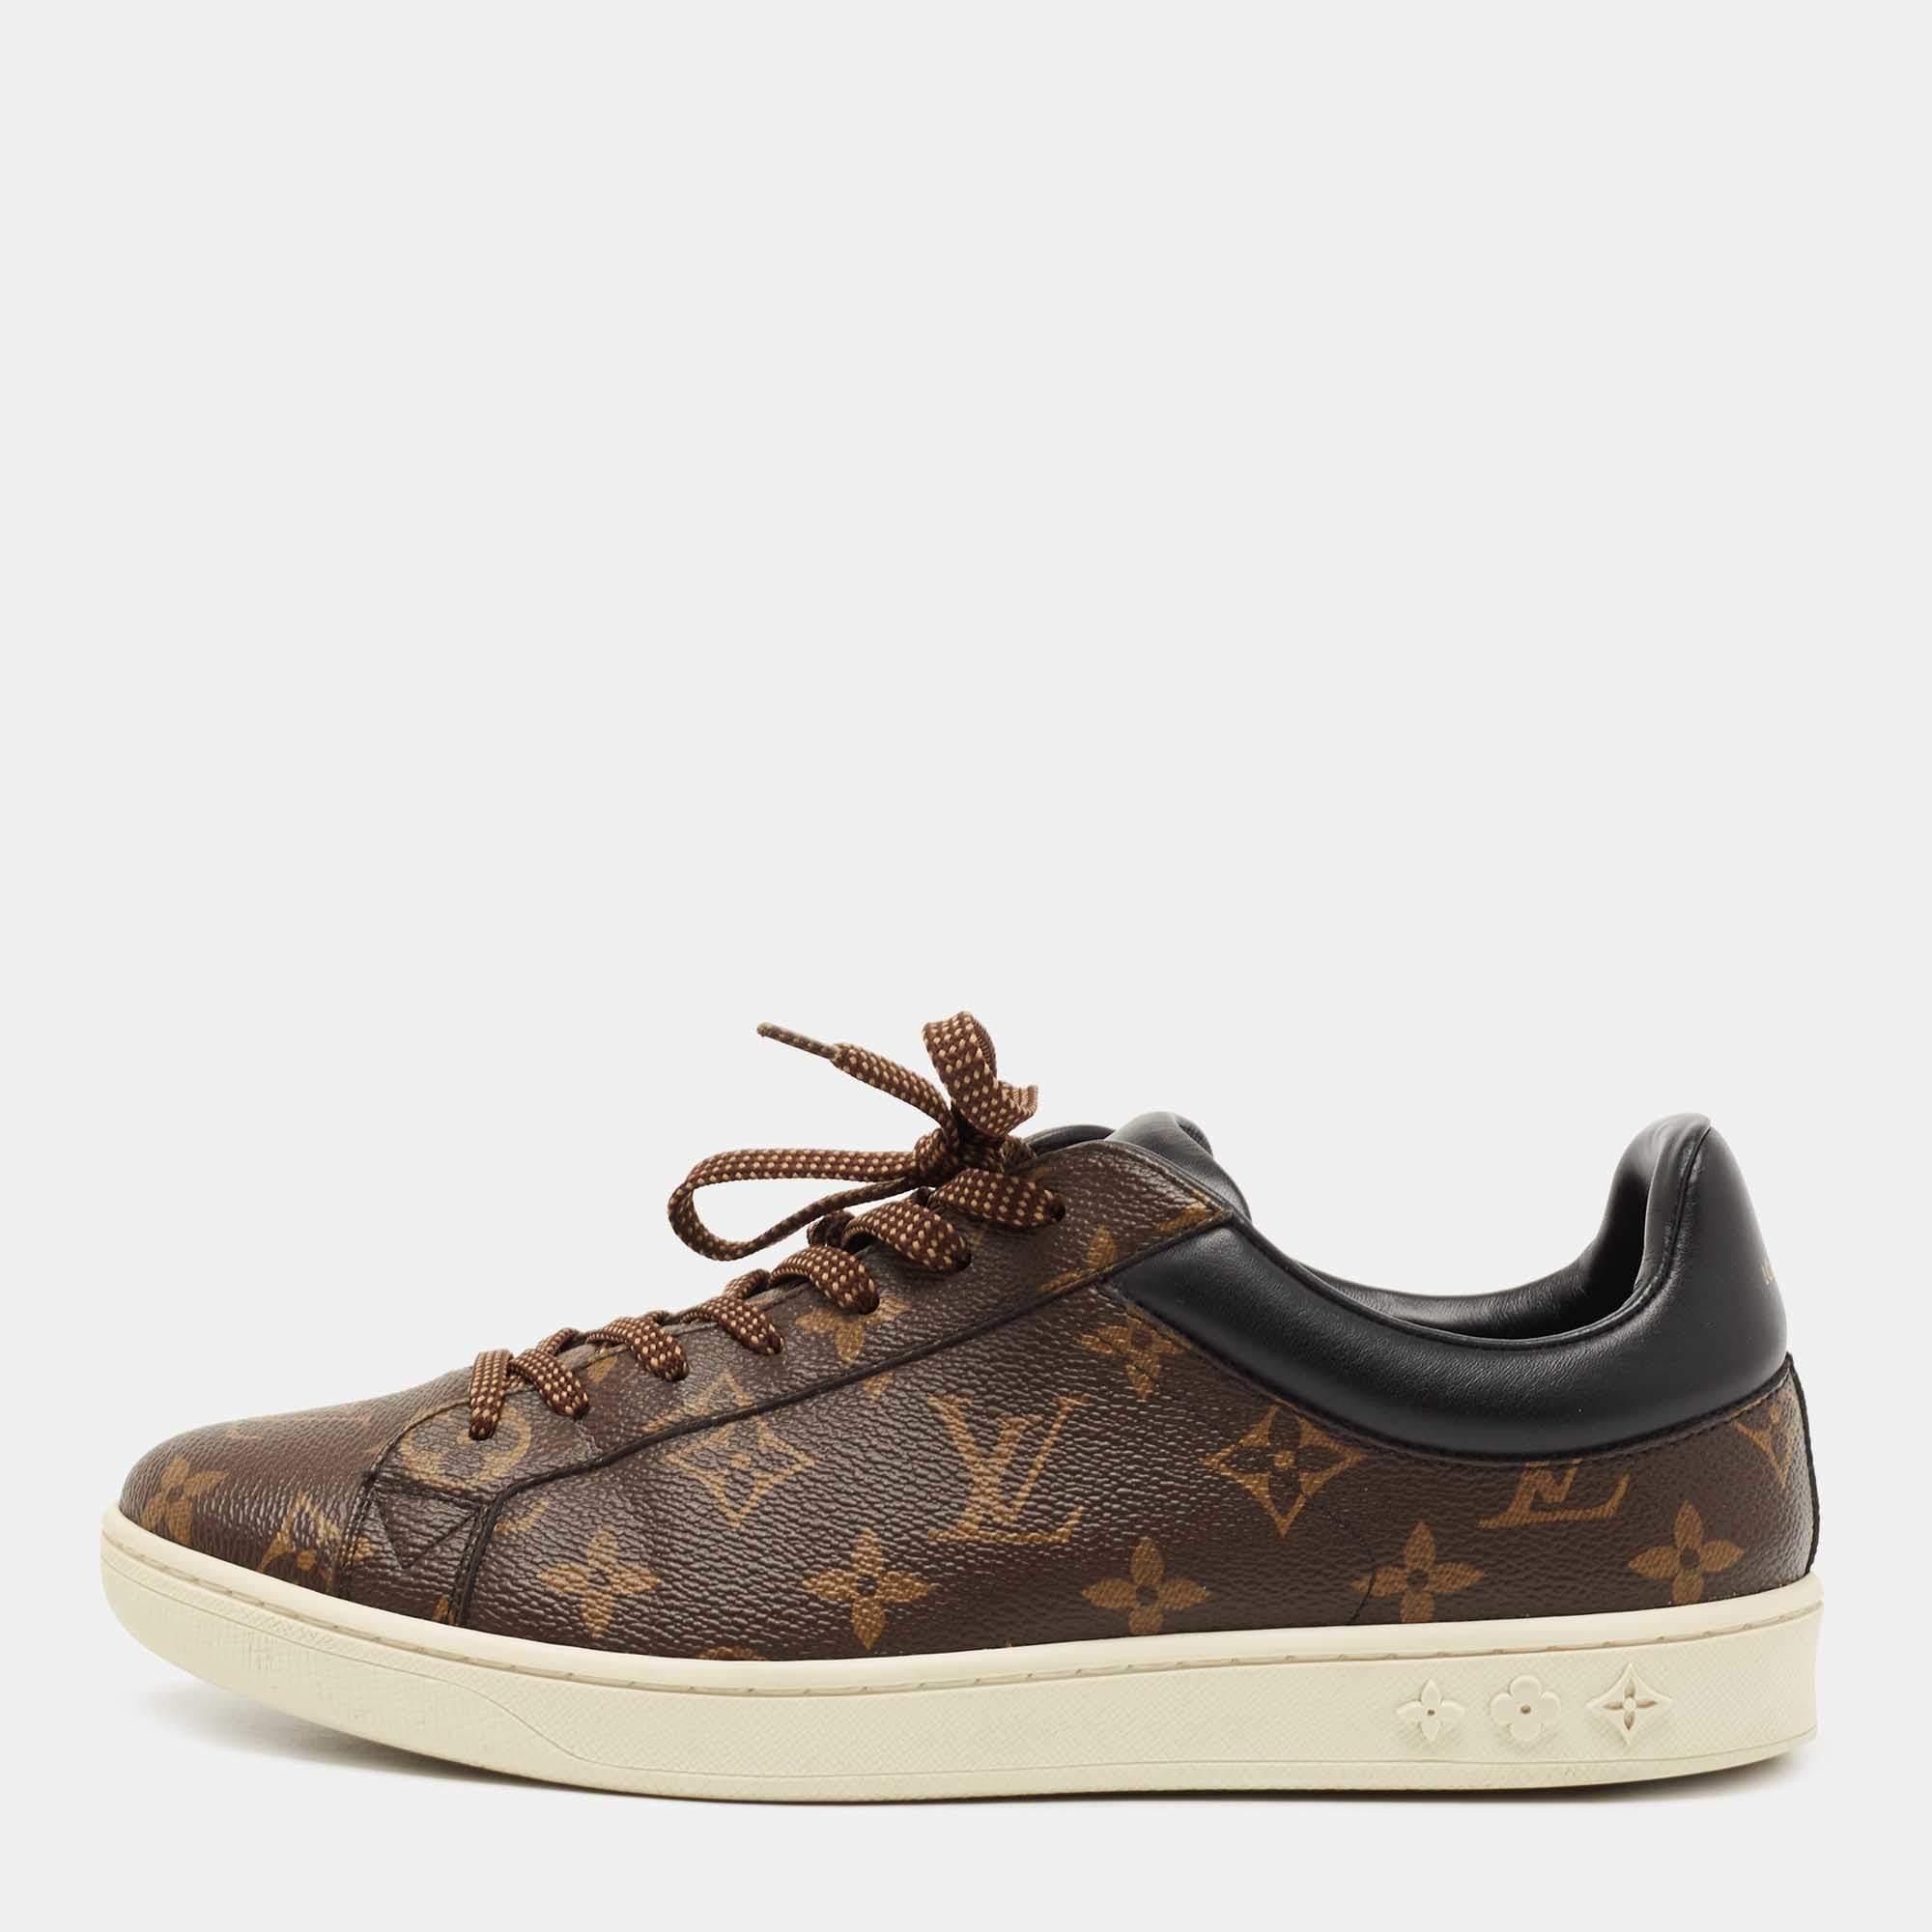 Louis Vuitton Pre-Loved Luxembourg sneakers for Men - Brown in KSA